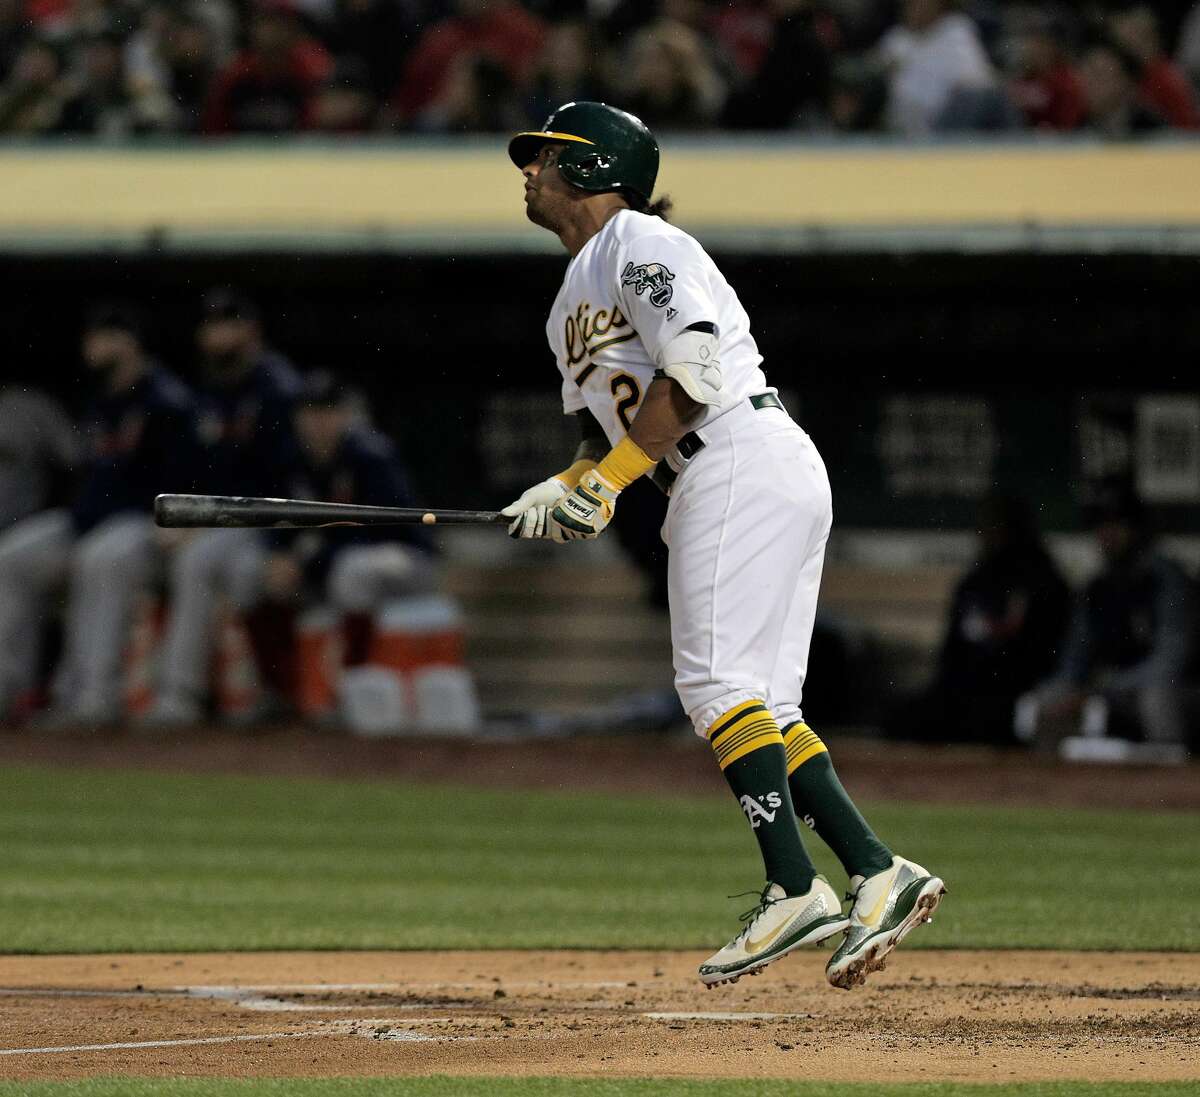 Khris Davis (2) hops up as he watches his solo homerun in the second inning as the Oakland Athletics played the Boston Red Sox at the Coliseum in Oakland, Calif., on Monday, April 1, 2019.